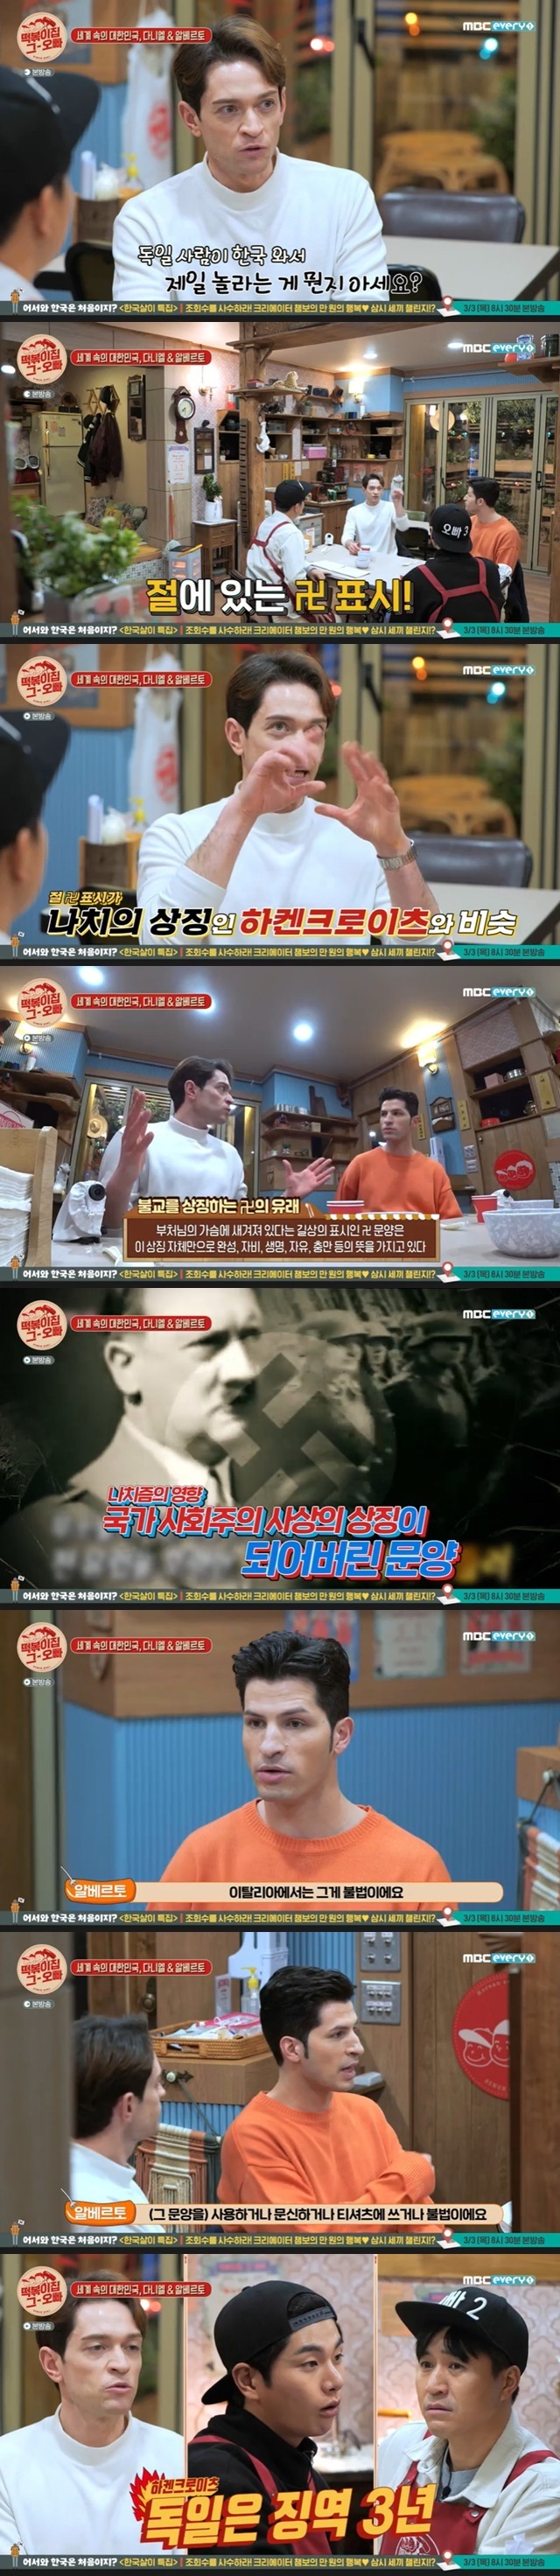 Daniel confessed that he was surprised to see the sign of Korea.MBC Everlon Tteokbokki house brother broadcast on March 1 appeared Daniel from Germany and Alberto Fujimori from Italy.On the day of the broadcast, Daniel said, It is not what Germany people are most surprised to come to Korea. He heard a sign similar to the Nazi symbol, Harken Kreutz.Daniel explained that the symbol itself is old, and that it has made a symbol of national socialism that is several thousand years old, and that it is a symbol of Nazism.Alberto Fujimori said it is Illegal to use Harkenkrewitz in Italy, saying, If you use it anywhere, tattoo it or show a T-shirt, it is Illegal.Daniel added that Germany has three years in prison and if you have it or show it in public.Lee Yi-kyung said, I would have been surprised to see the sign of me after passing the Seoul Bongeunsa. Daniel said, I was surprised at the center of the Seoul.